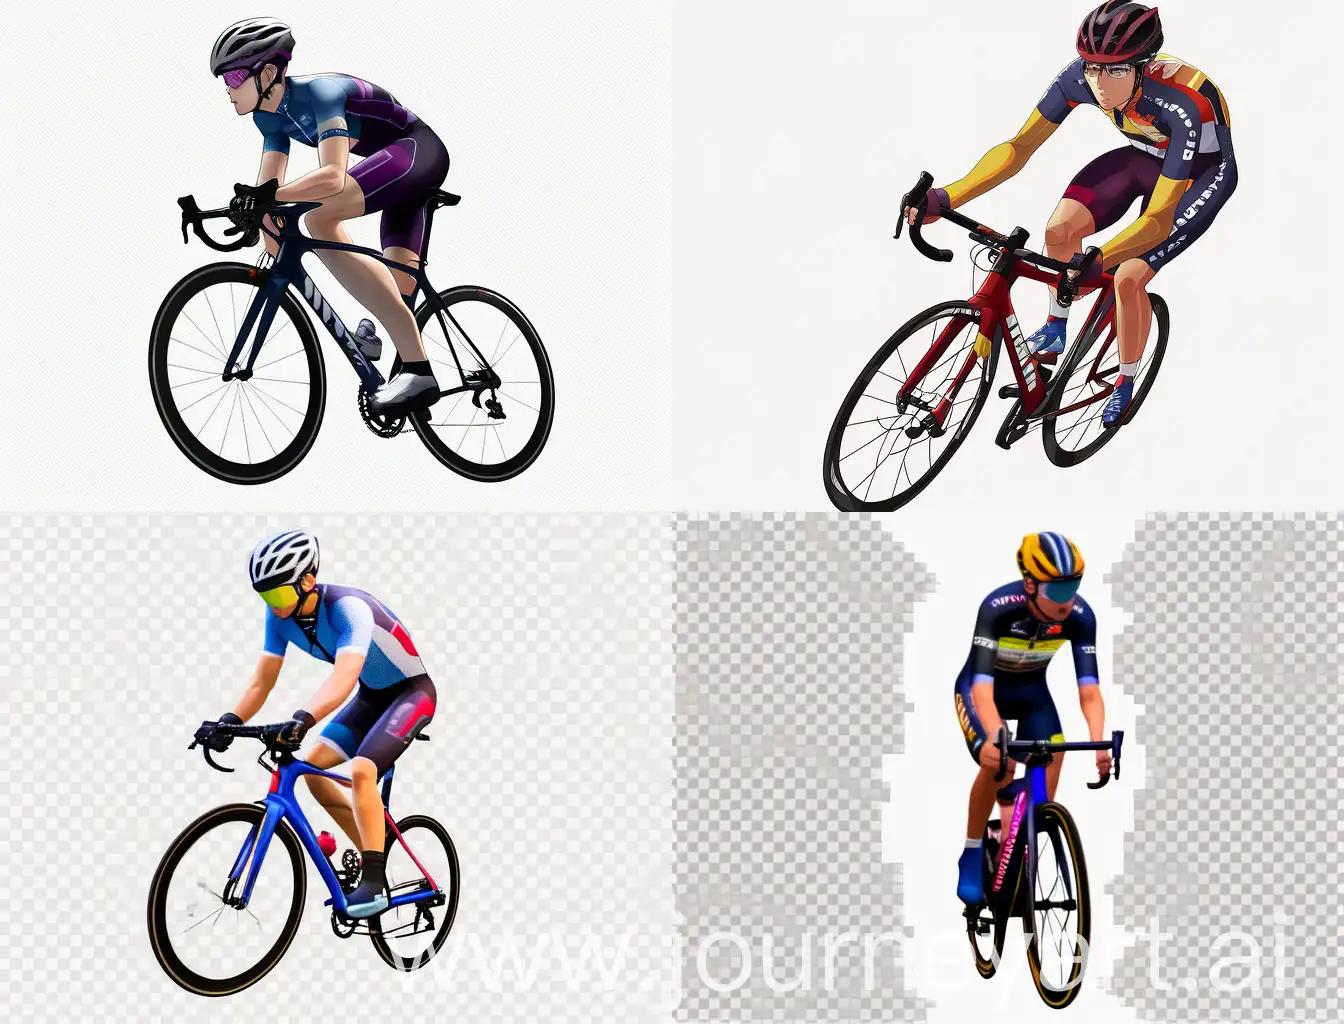 Frontal cyclist picture PNG material

